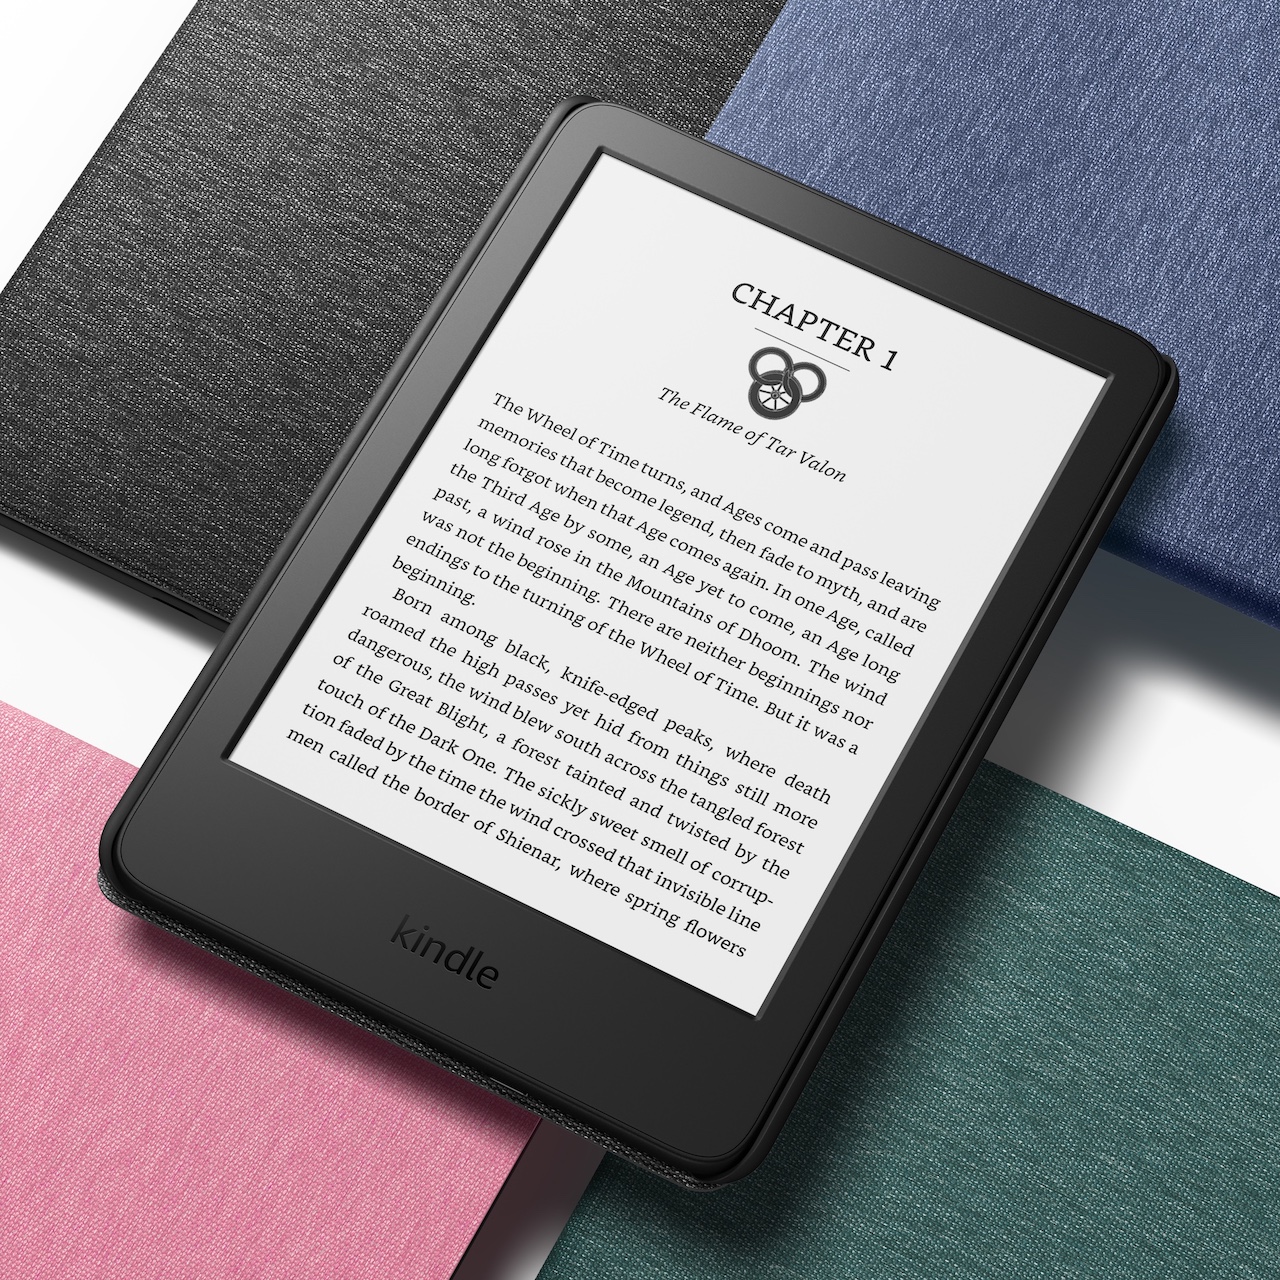 Amazon’s new Kindle offers twice the storage, a sharper screen, and USB